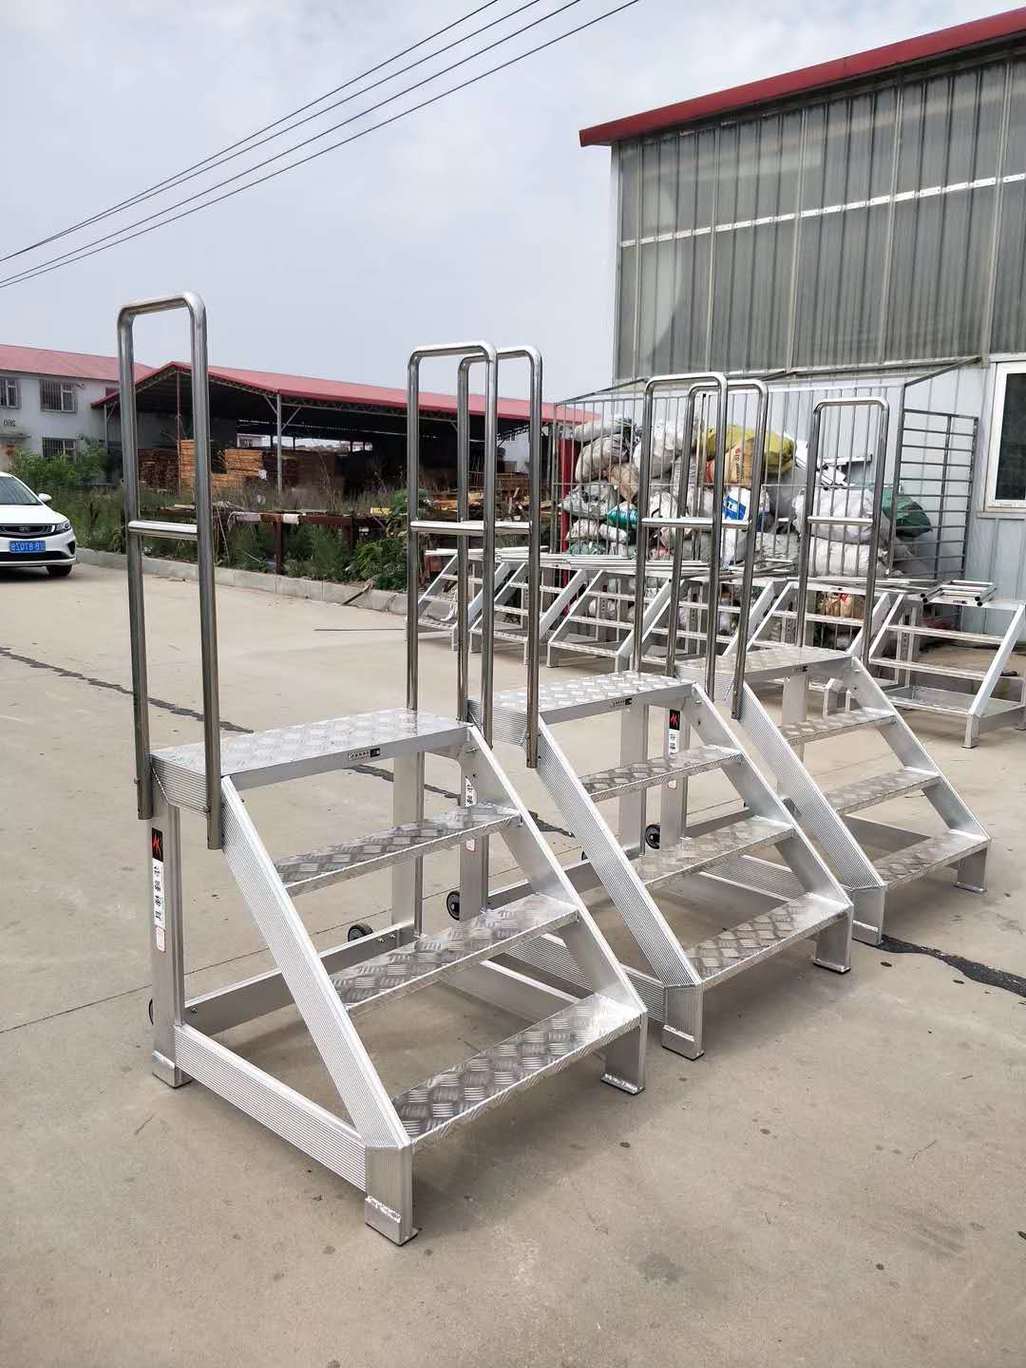 ﻿Aluminum alloy ladder brings convenience to users